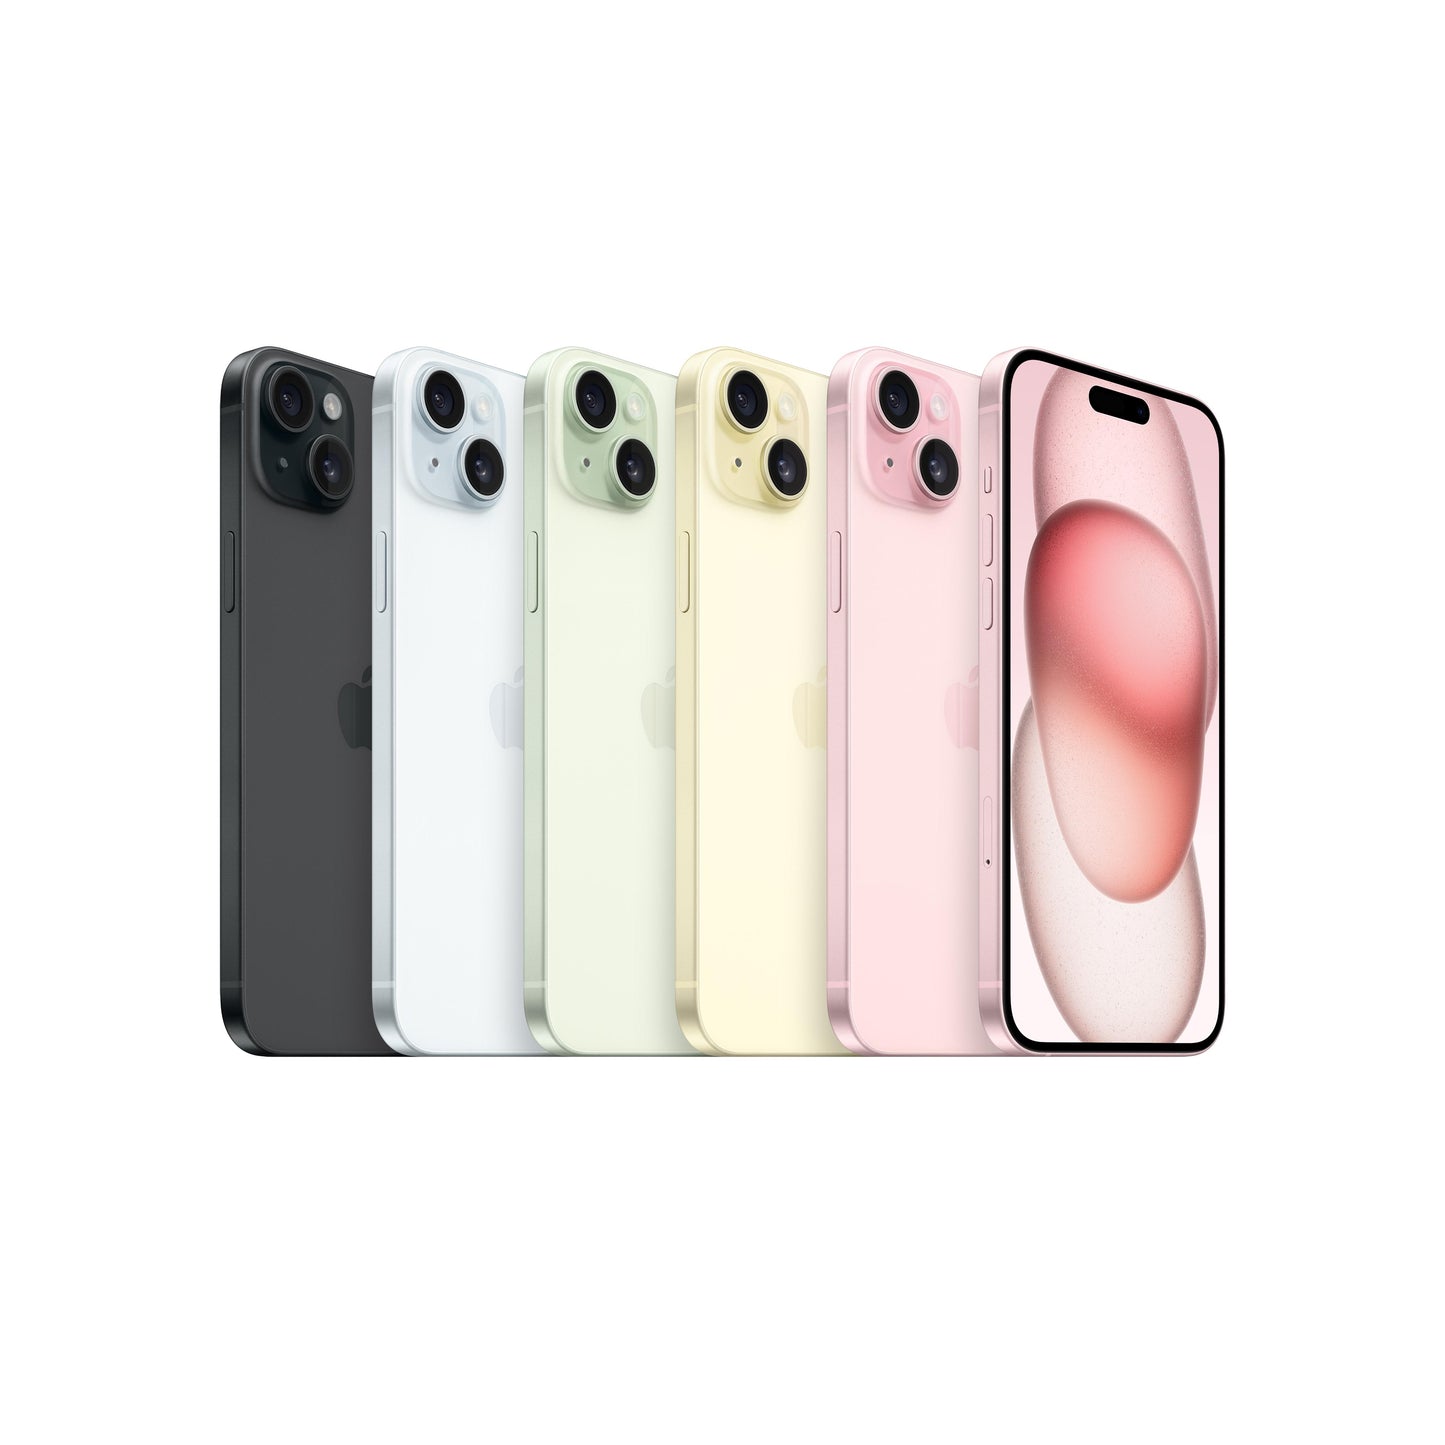 iPhone 15 Plus in Pink, 128GB Storage. EMI available |Get best offers for iphone 15 Plus [variant] Pink 128GB.